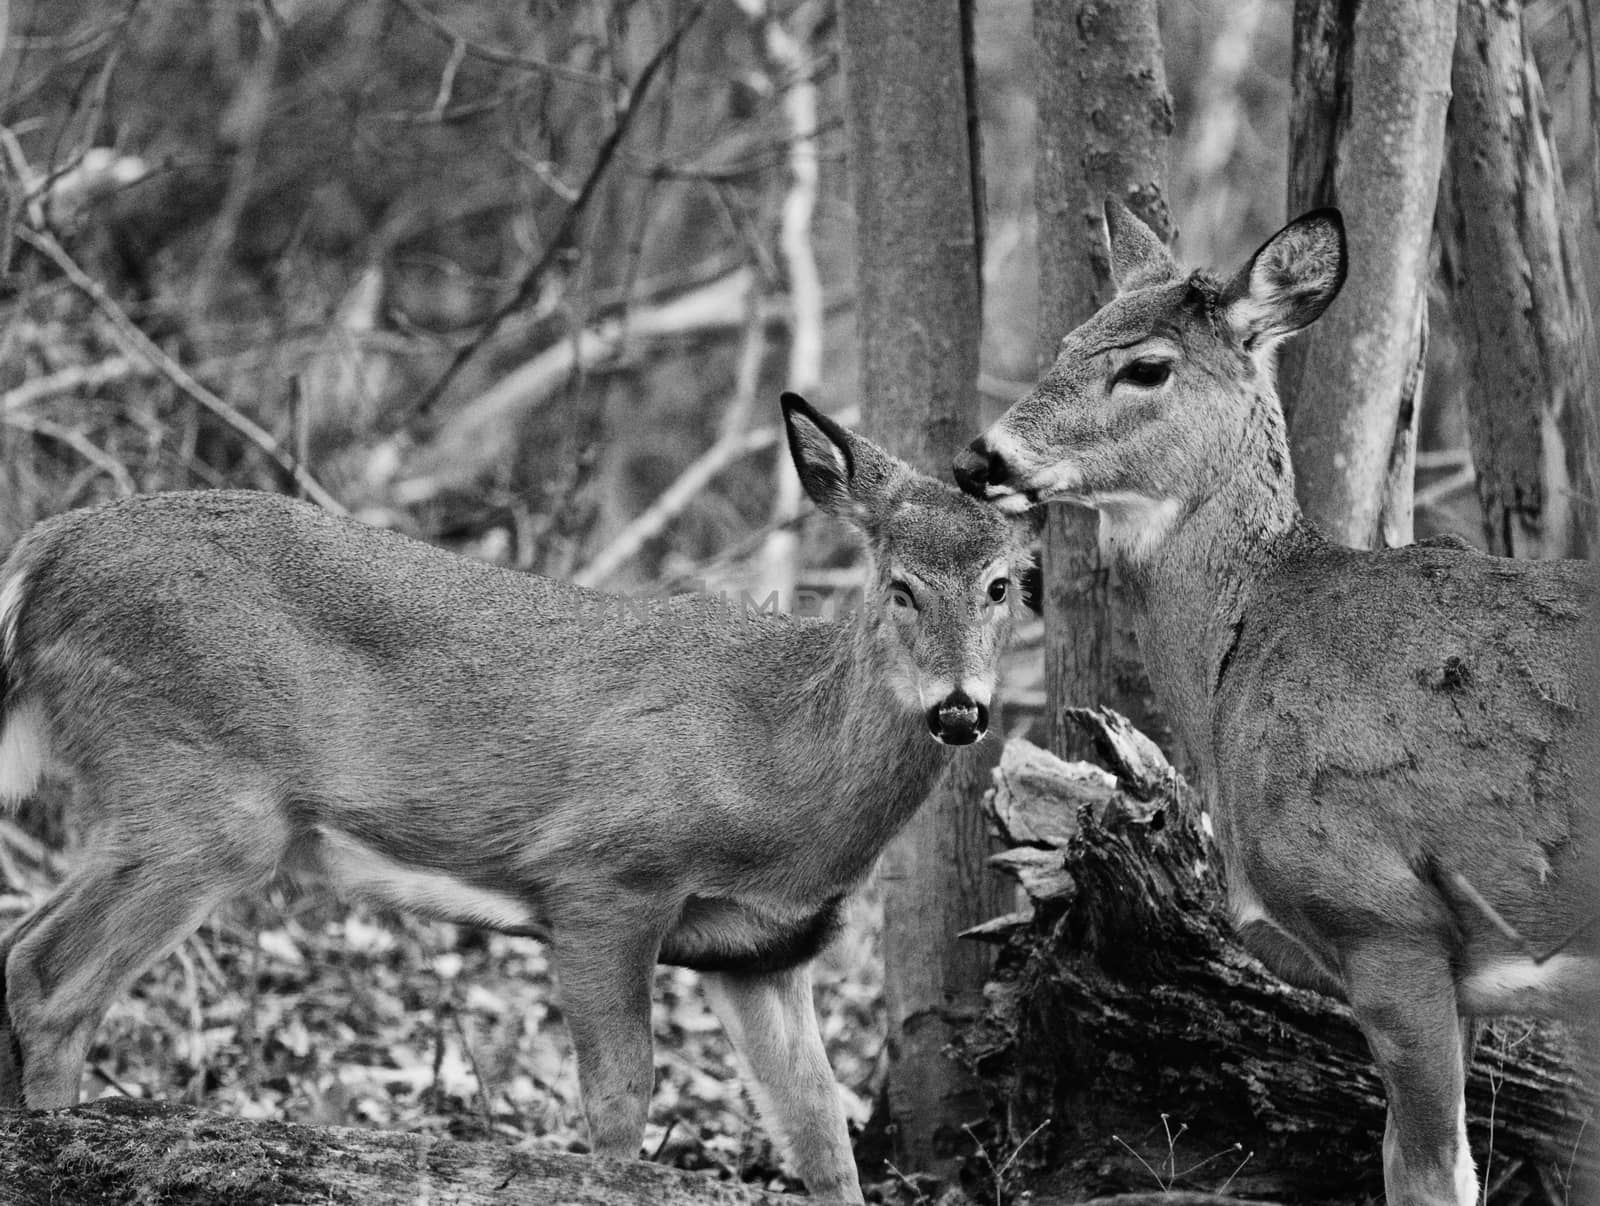 Beautiful black and white photo of the wild deer's love